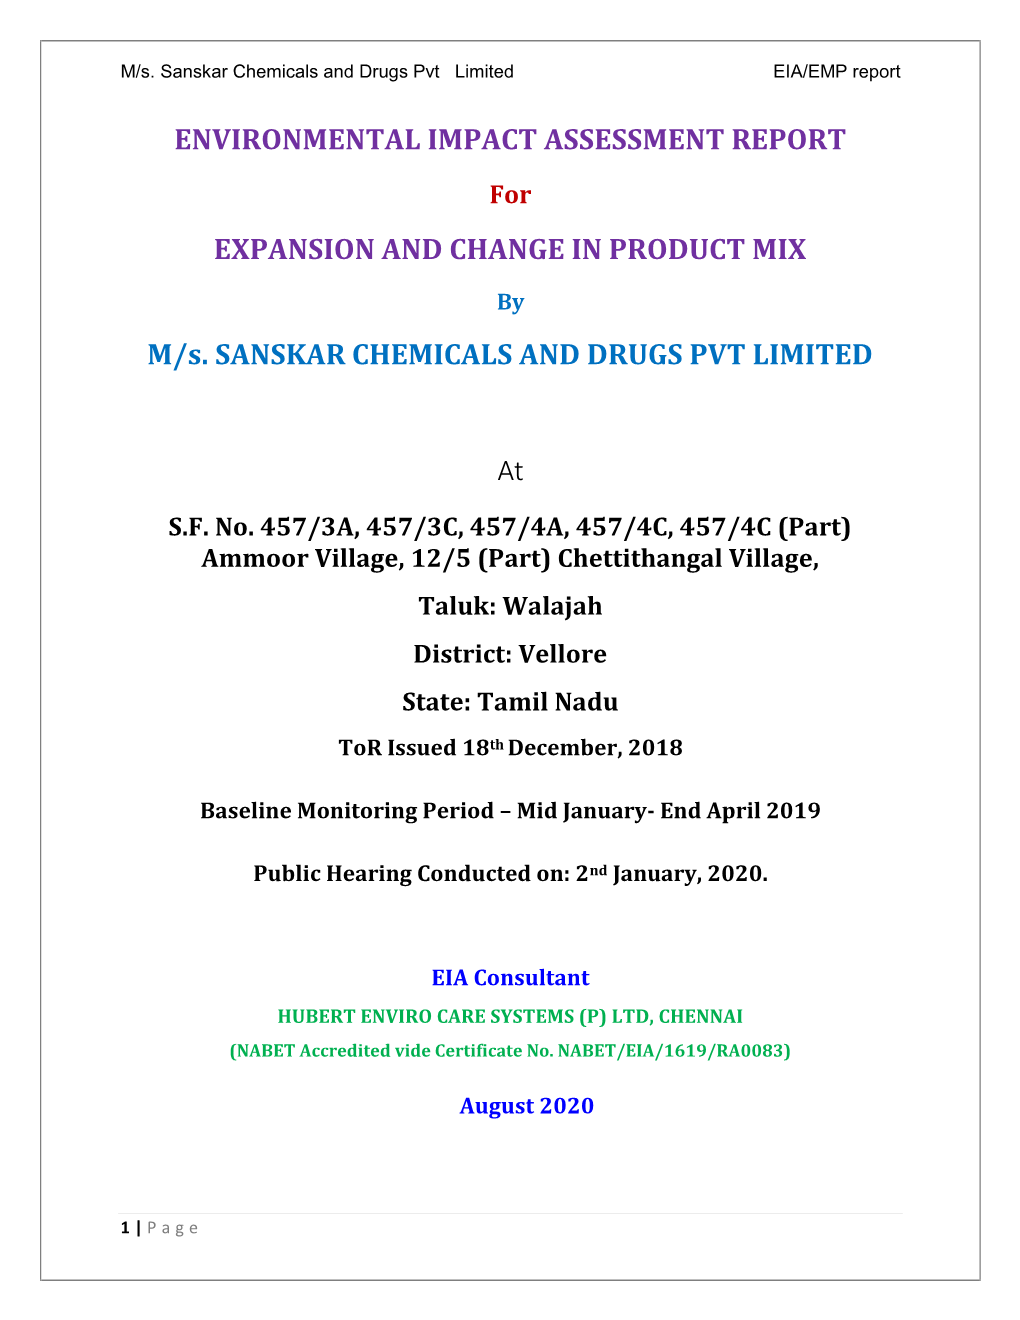 ENVIRONMENTAL IMPACT ASSESSMENT REPORT for EXPANSION and CHANGE in PRODUCT MIX